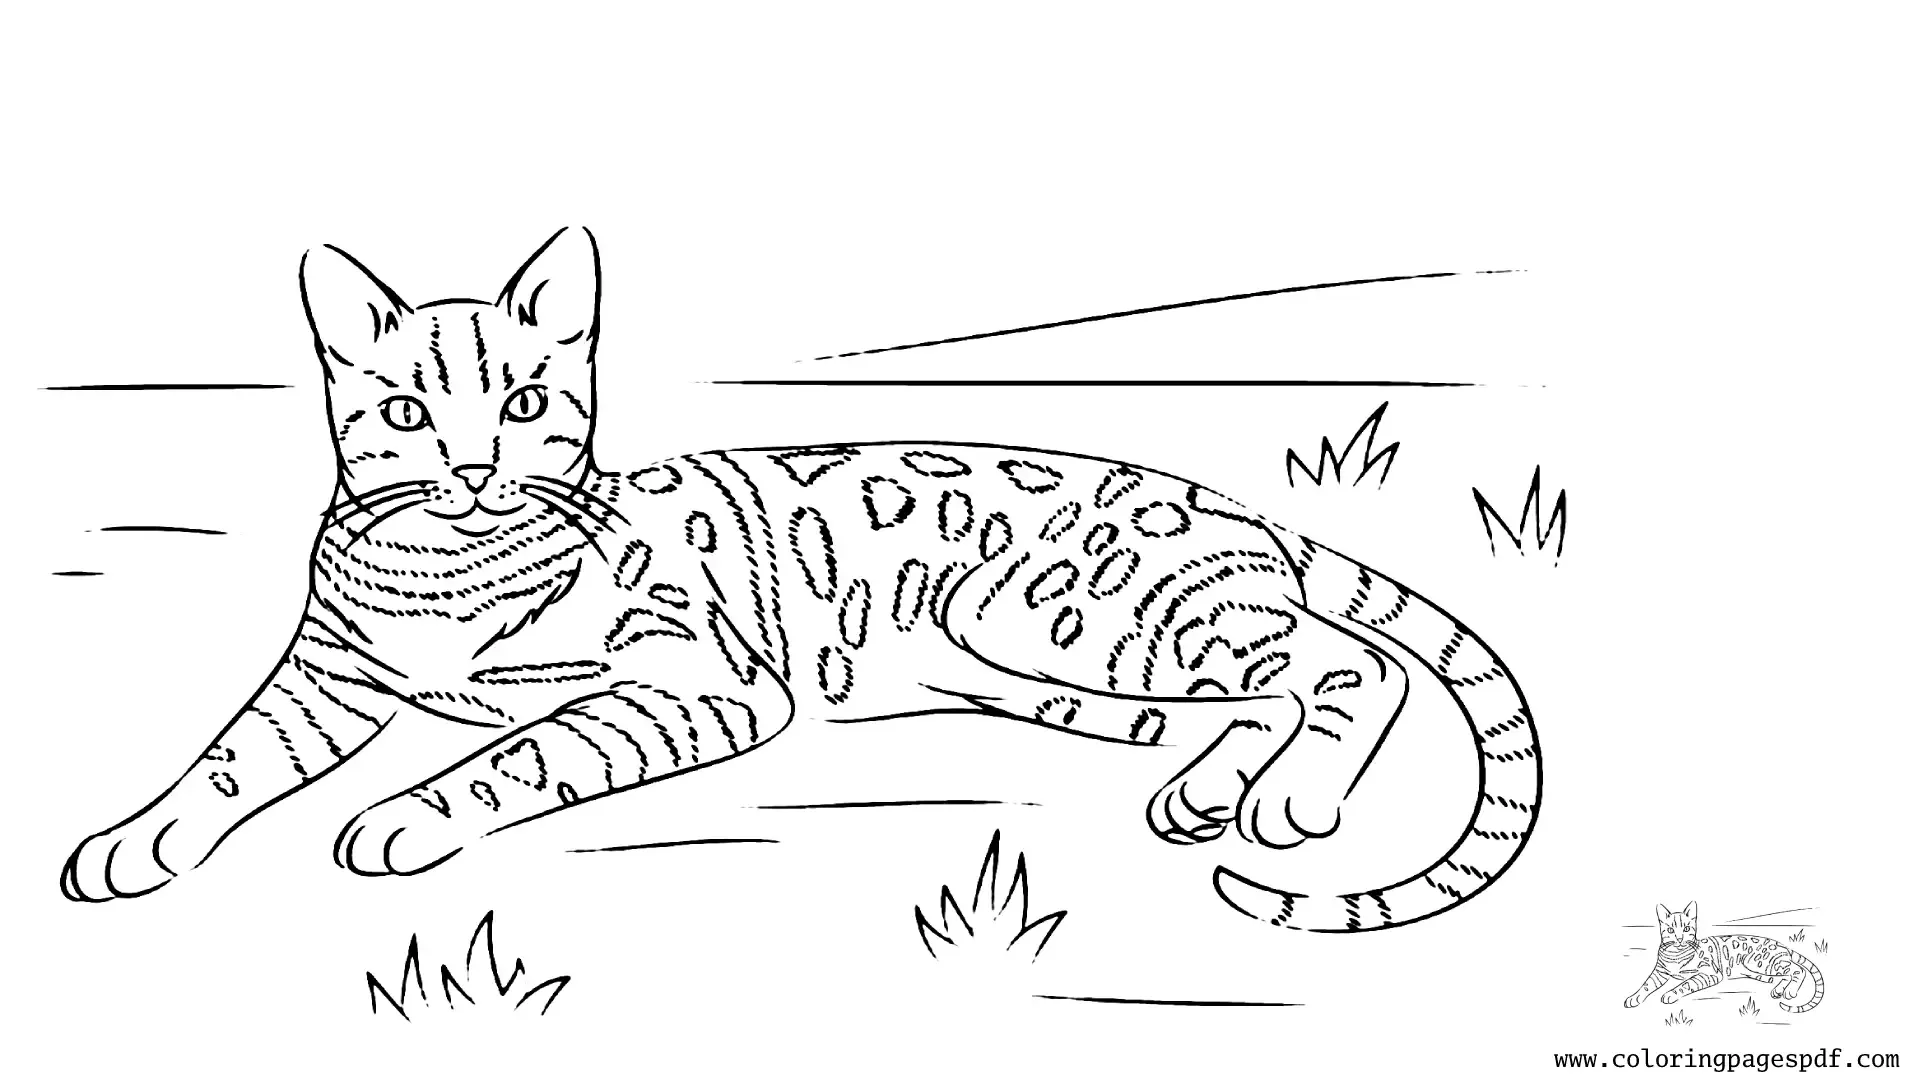 Coloring Page Of A Tiger-like Cat